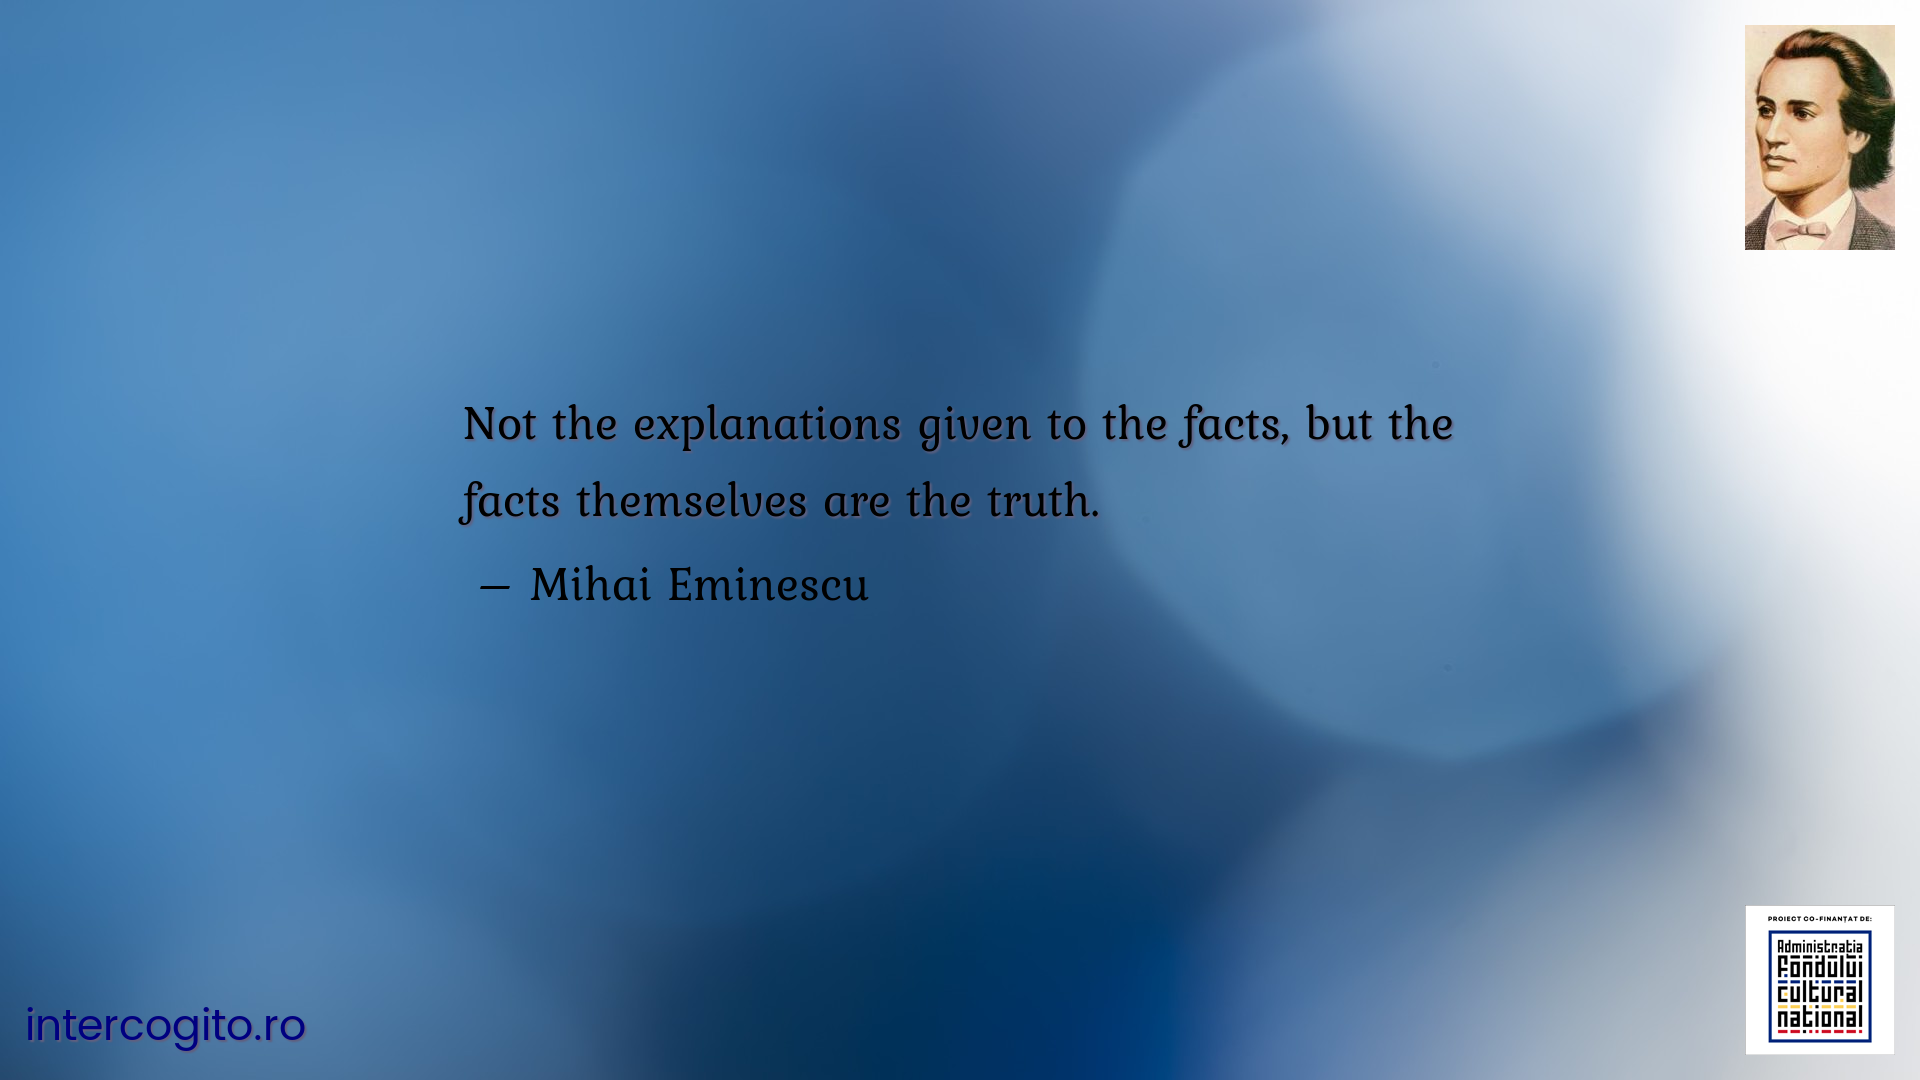 Not the explanations given to the facts, but the facts themselves are the truth.